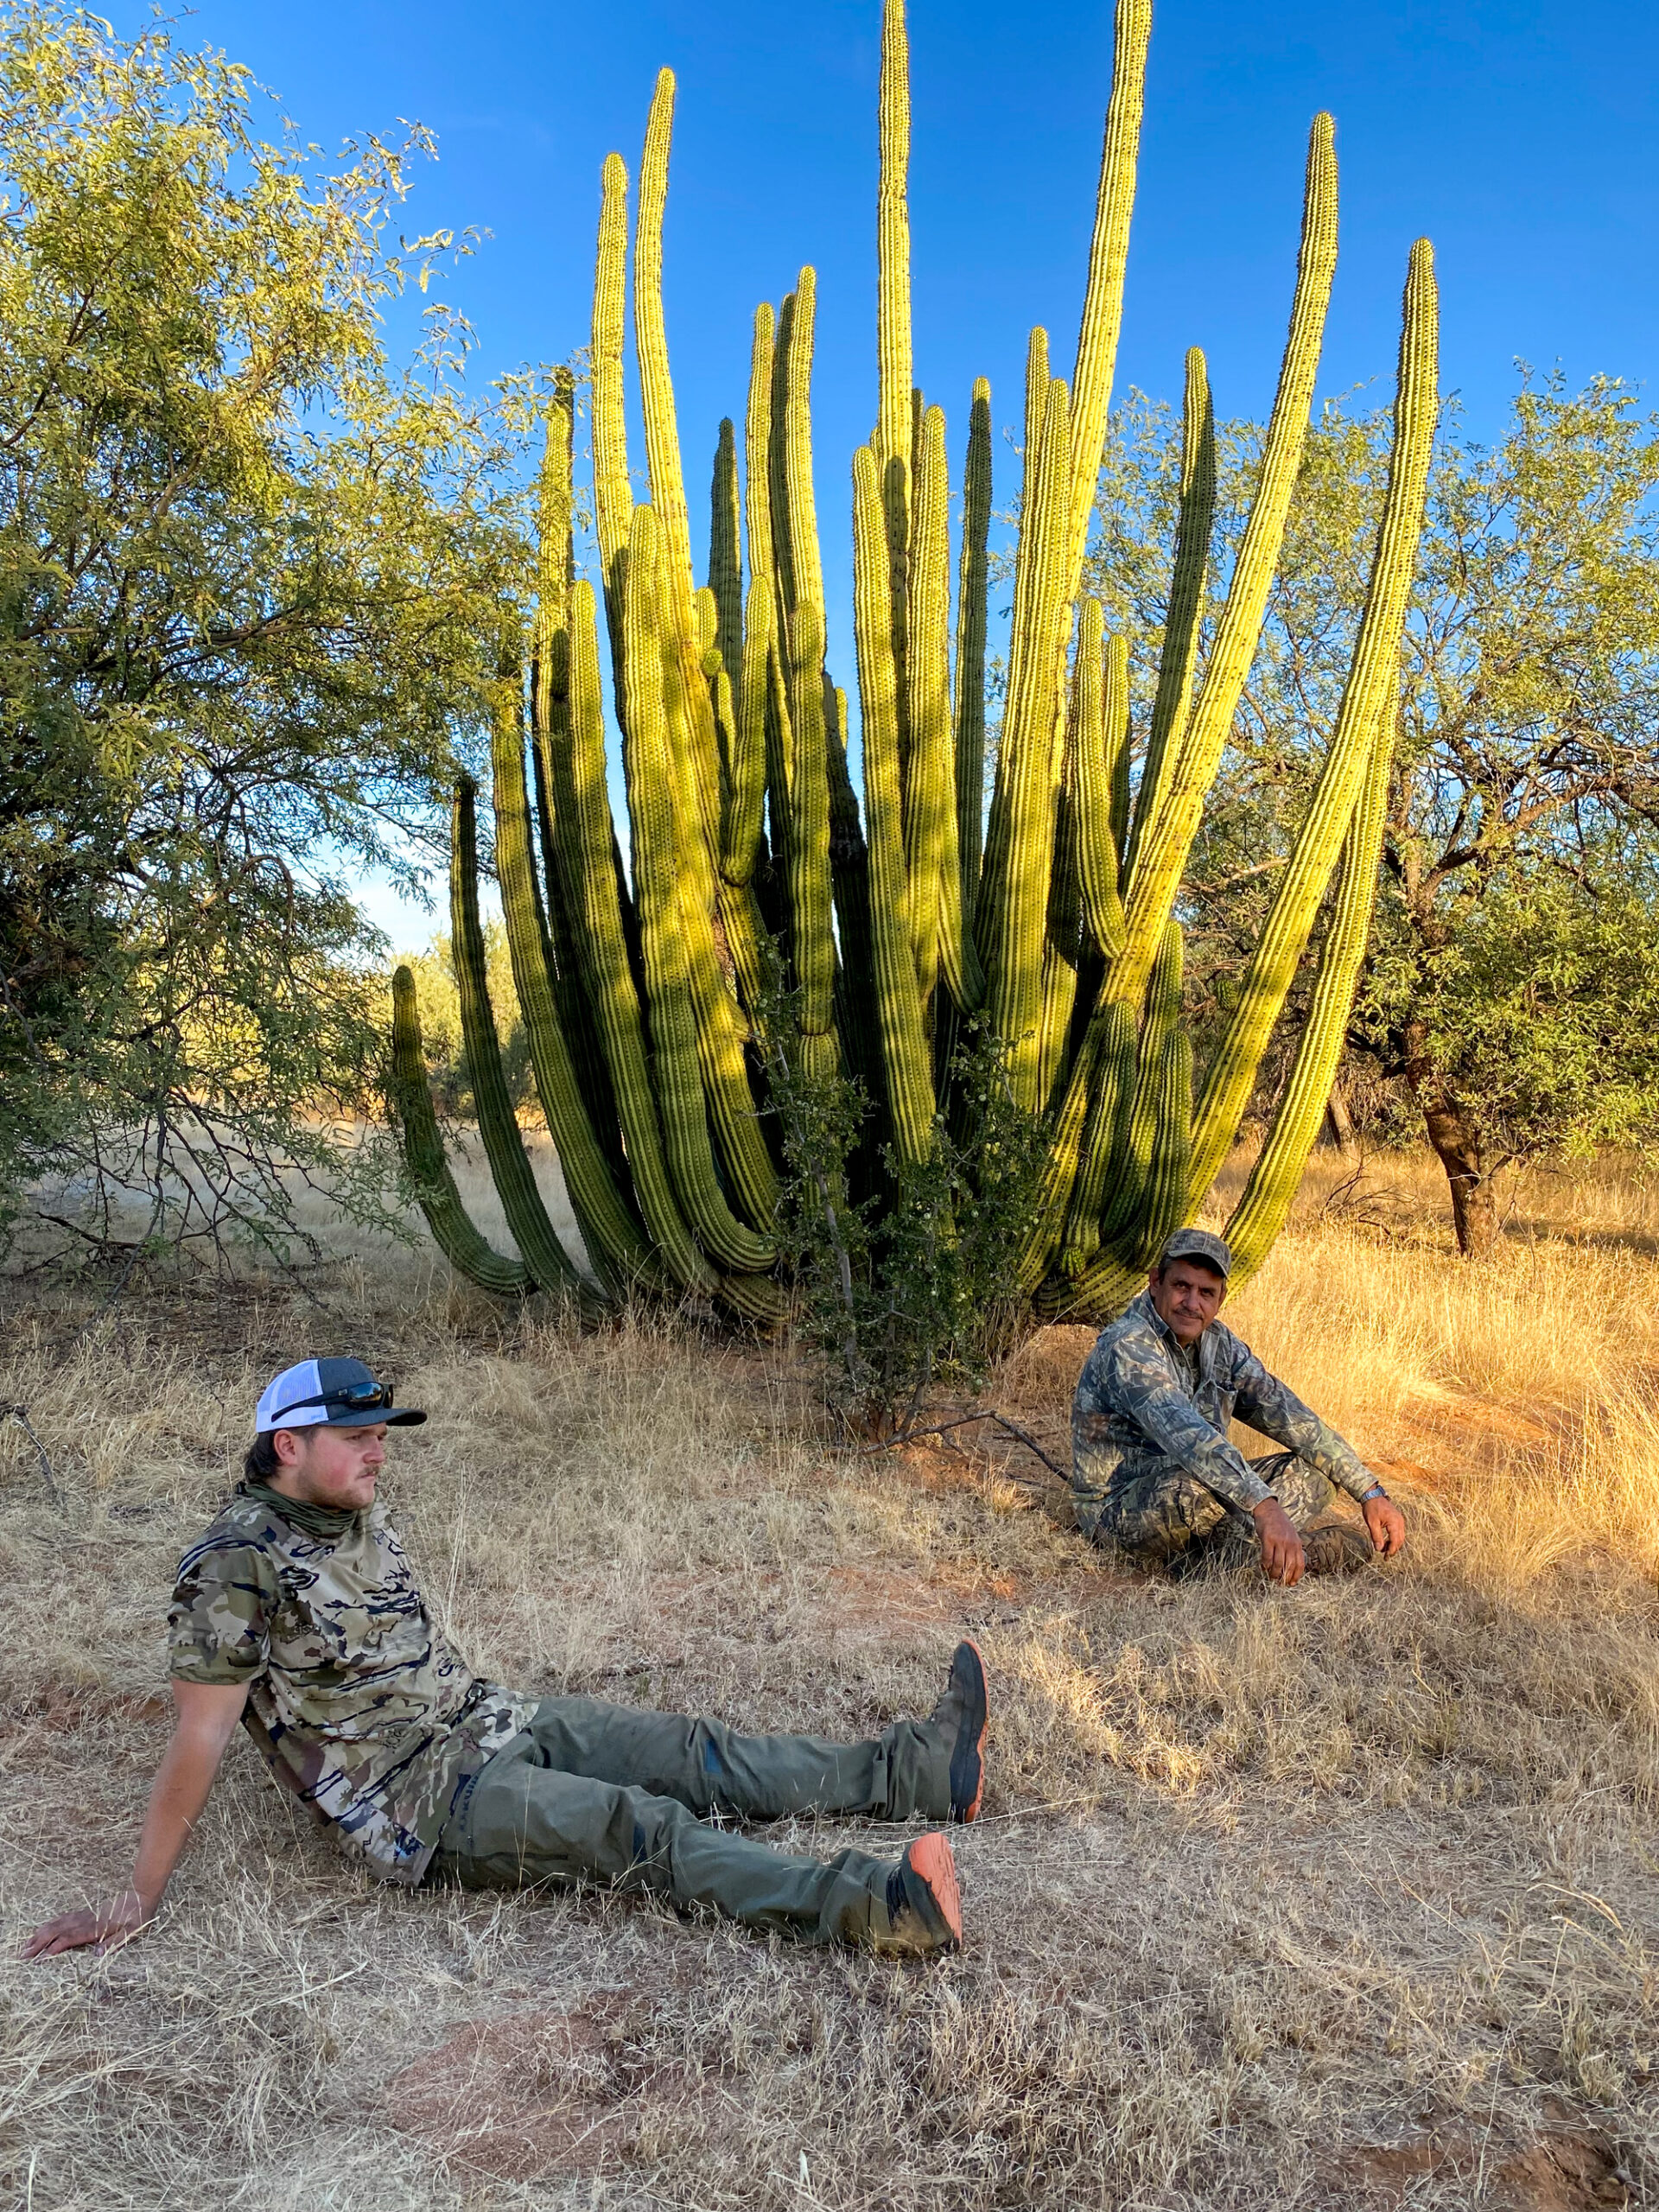 Two hunters relax near large cactus